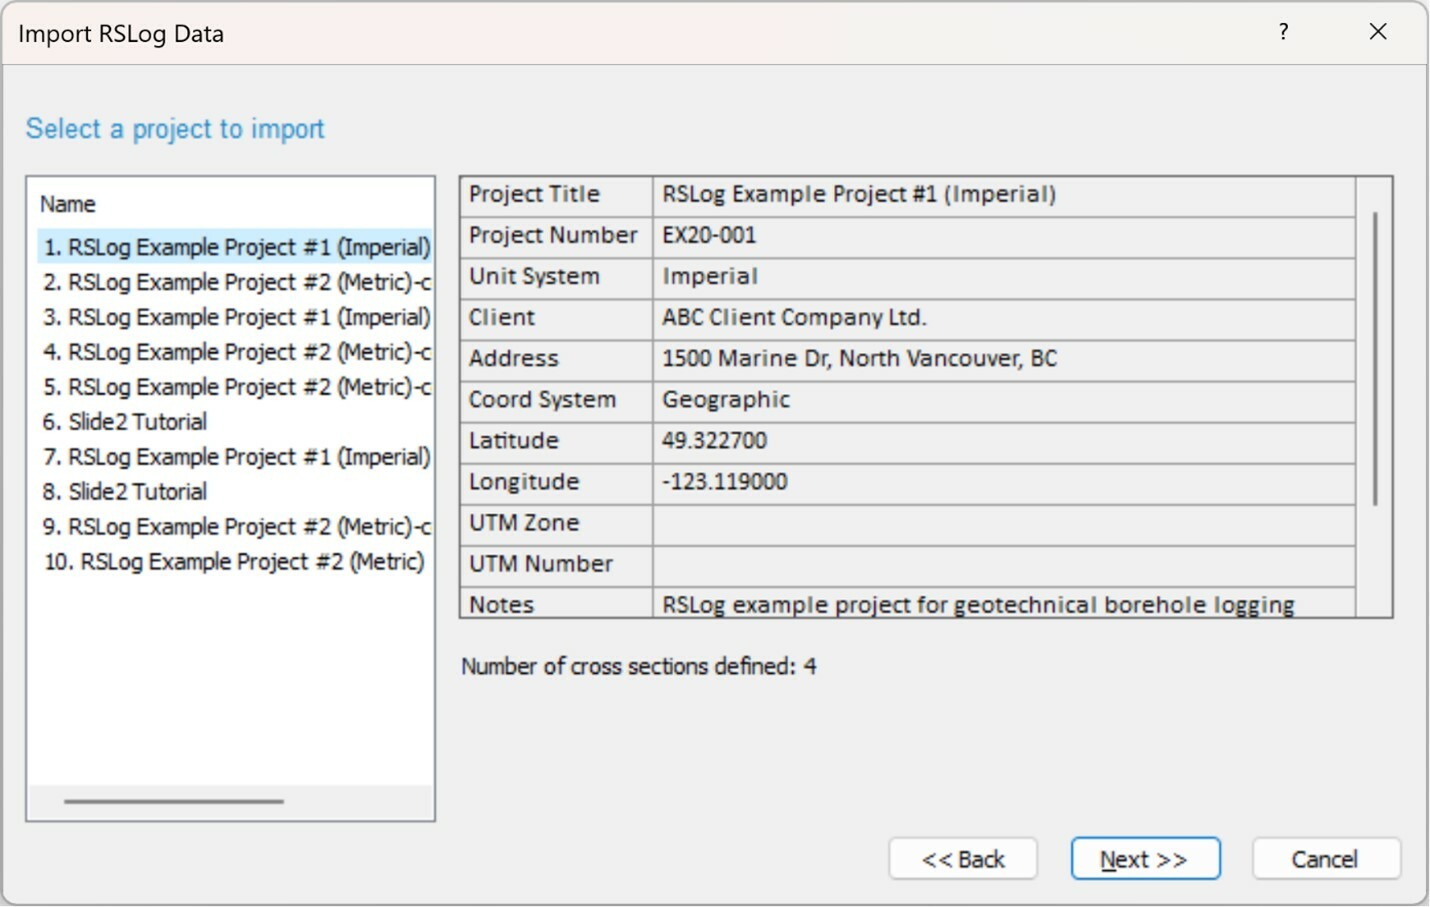 The image shows Import RSLog Data dialog in Slide2 - project list